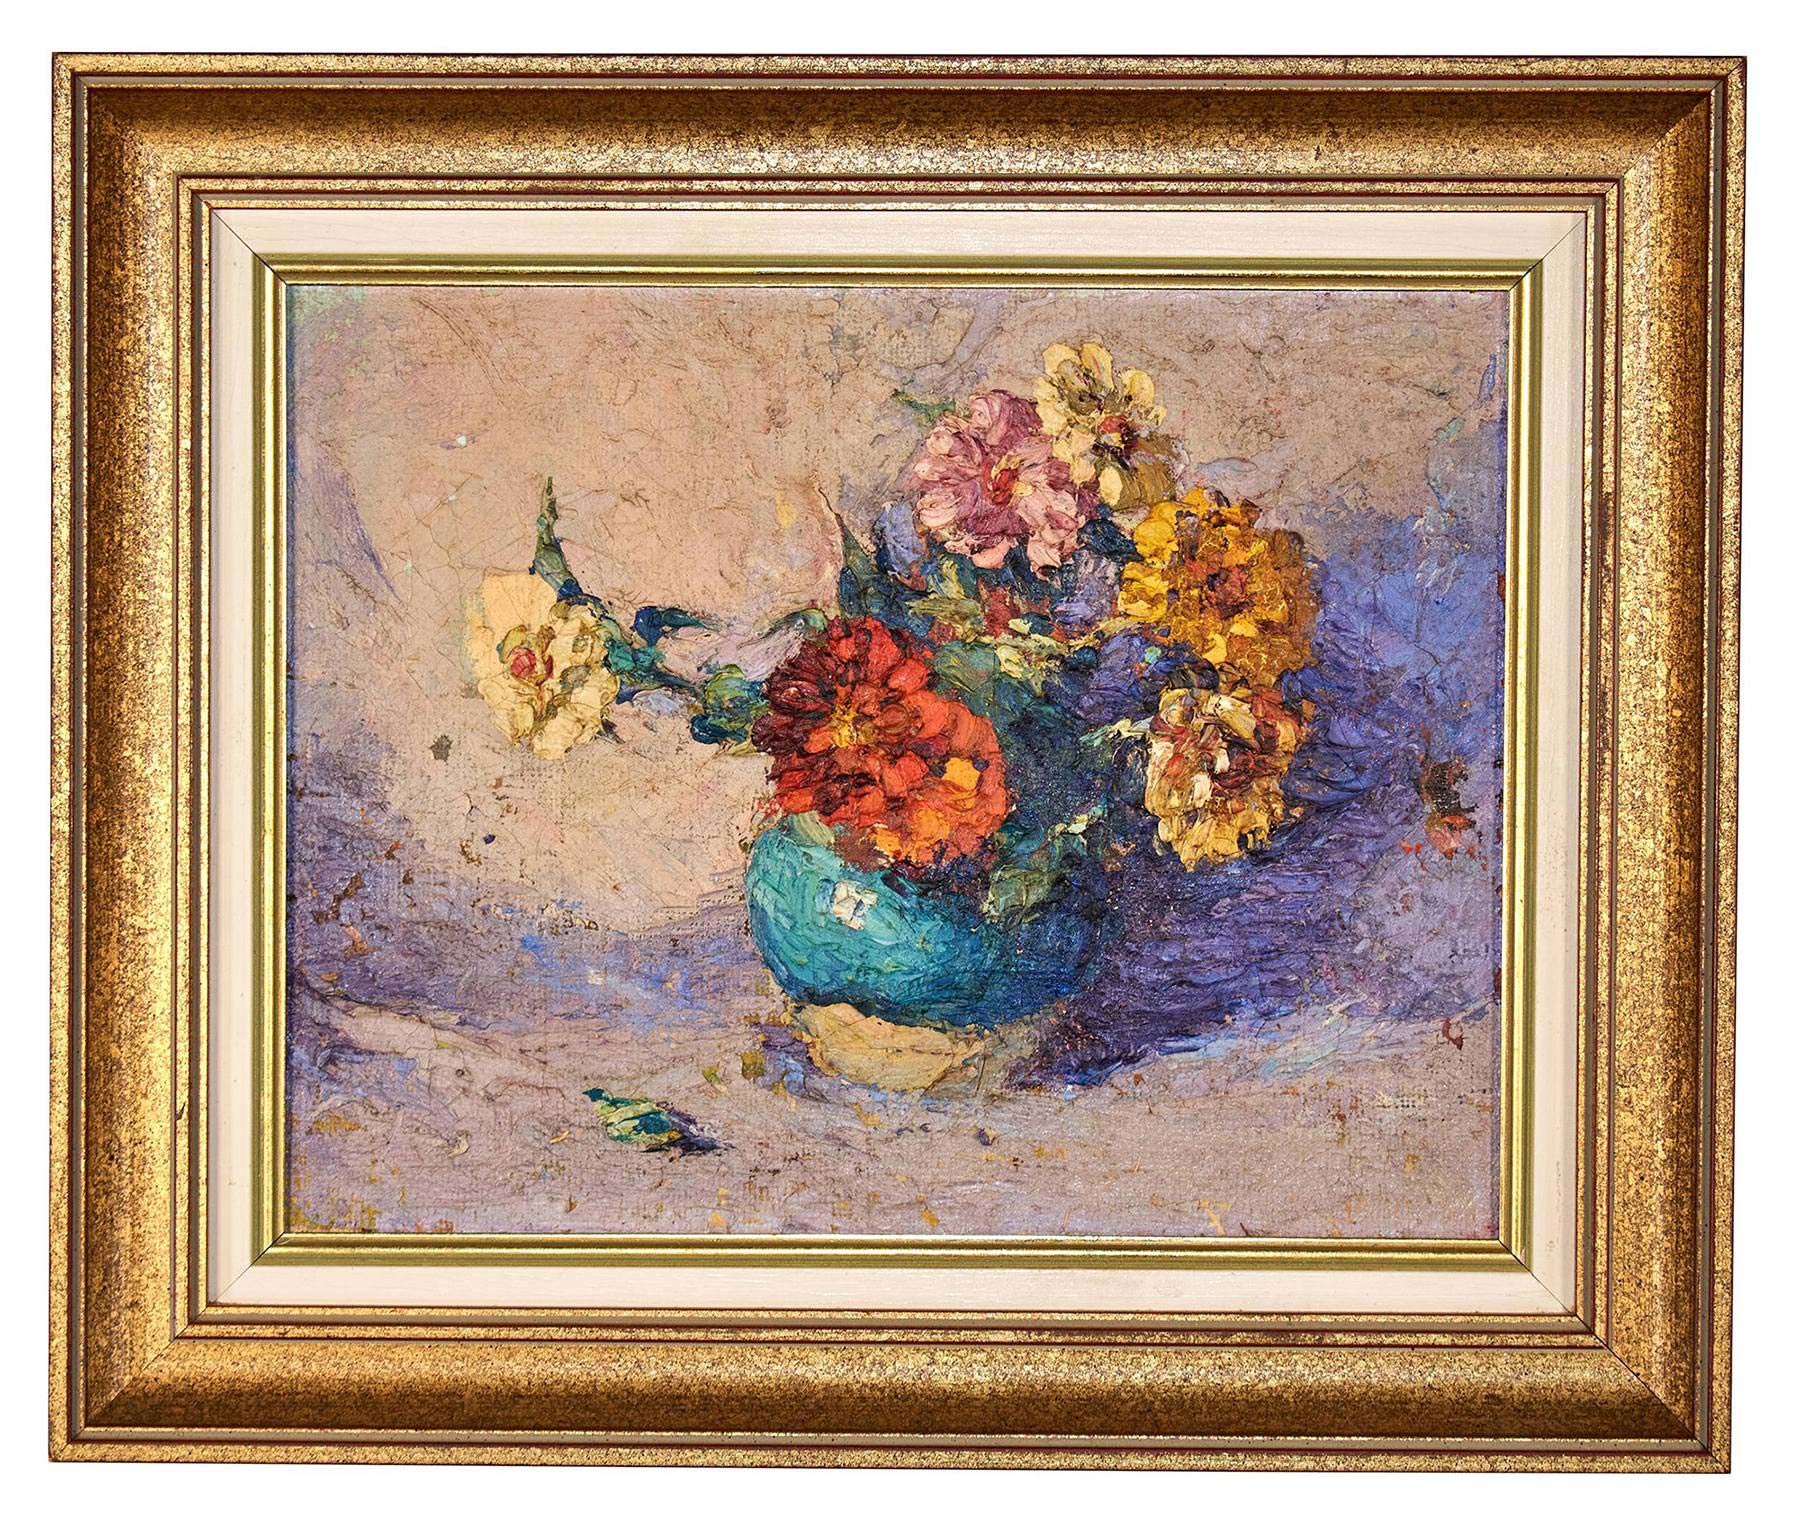 Mabel May Woodward (American, 1896-1943), Still life, oil on board, $500-$2,500.